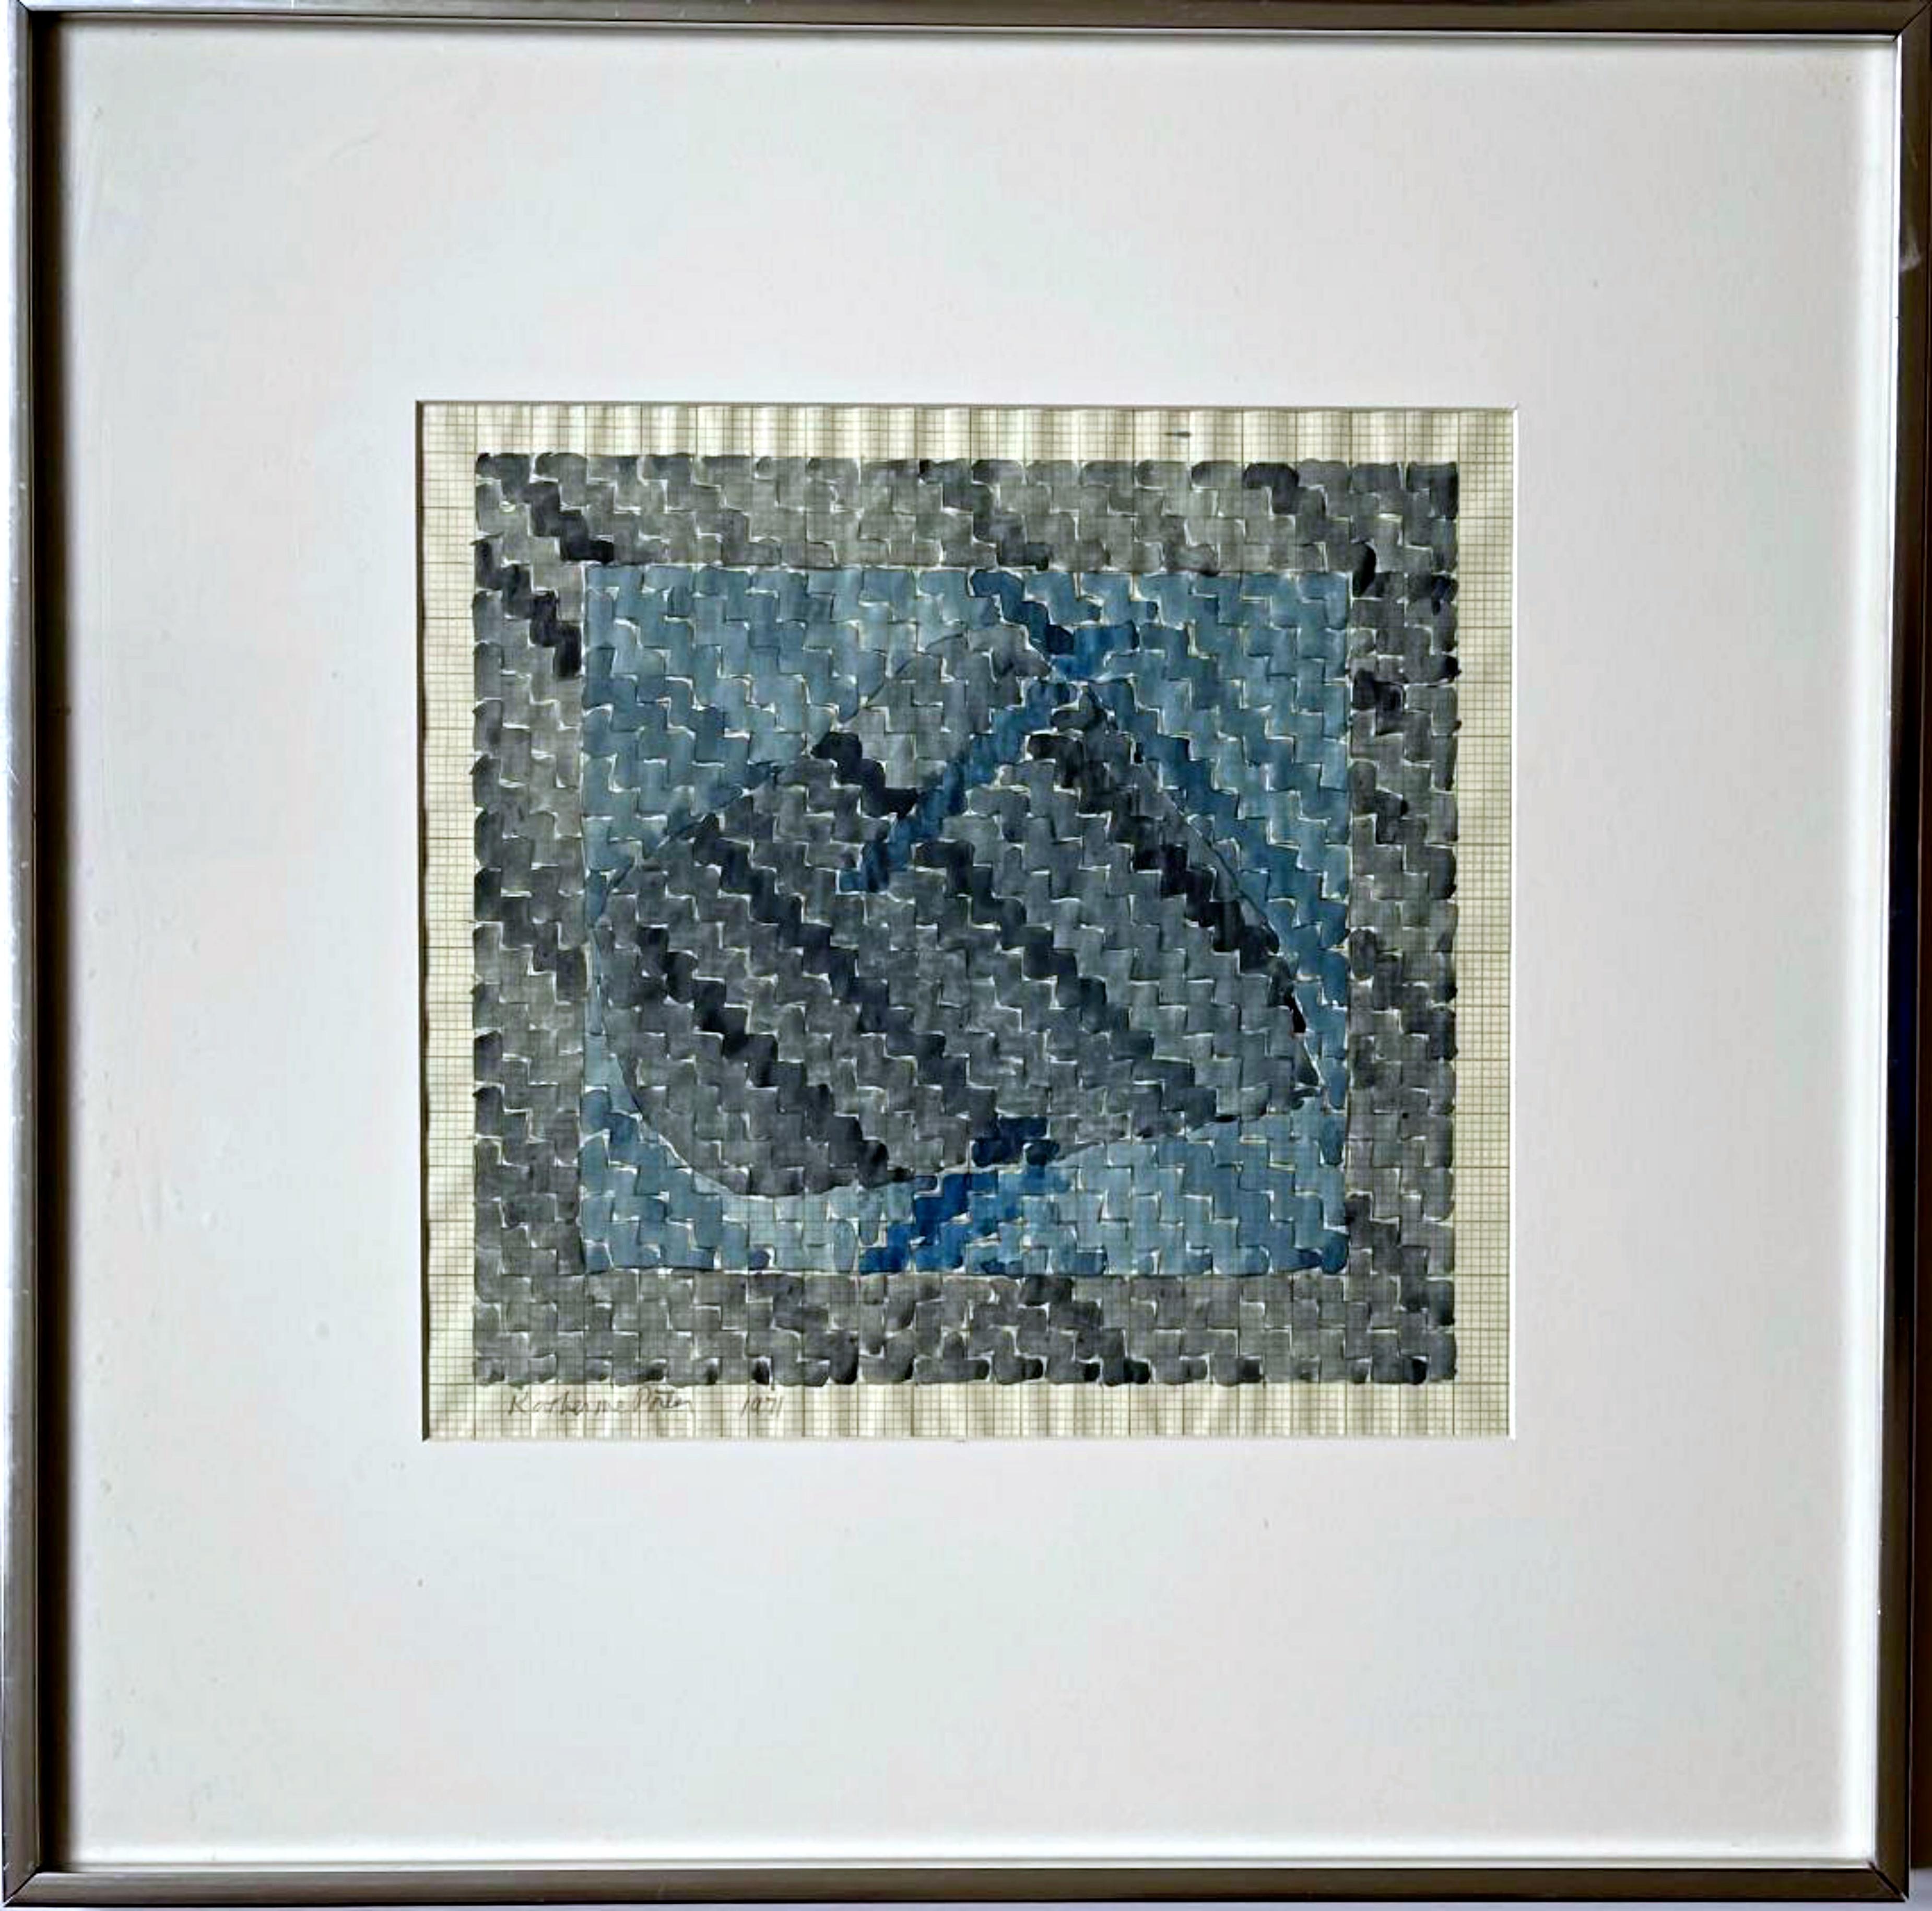 Katherine Porter
Geometric Abstraction, 1971
Watercolor and graphite on graph paper
Signed and dated 